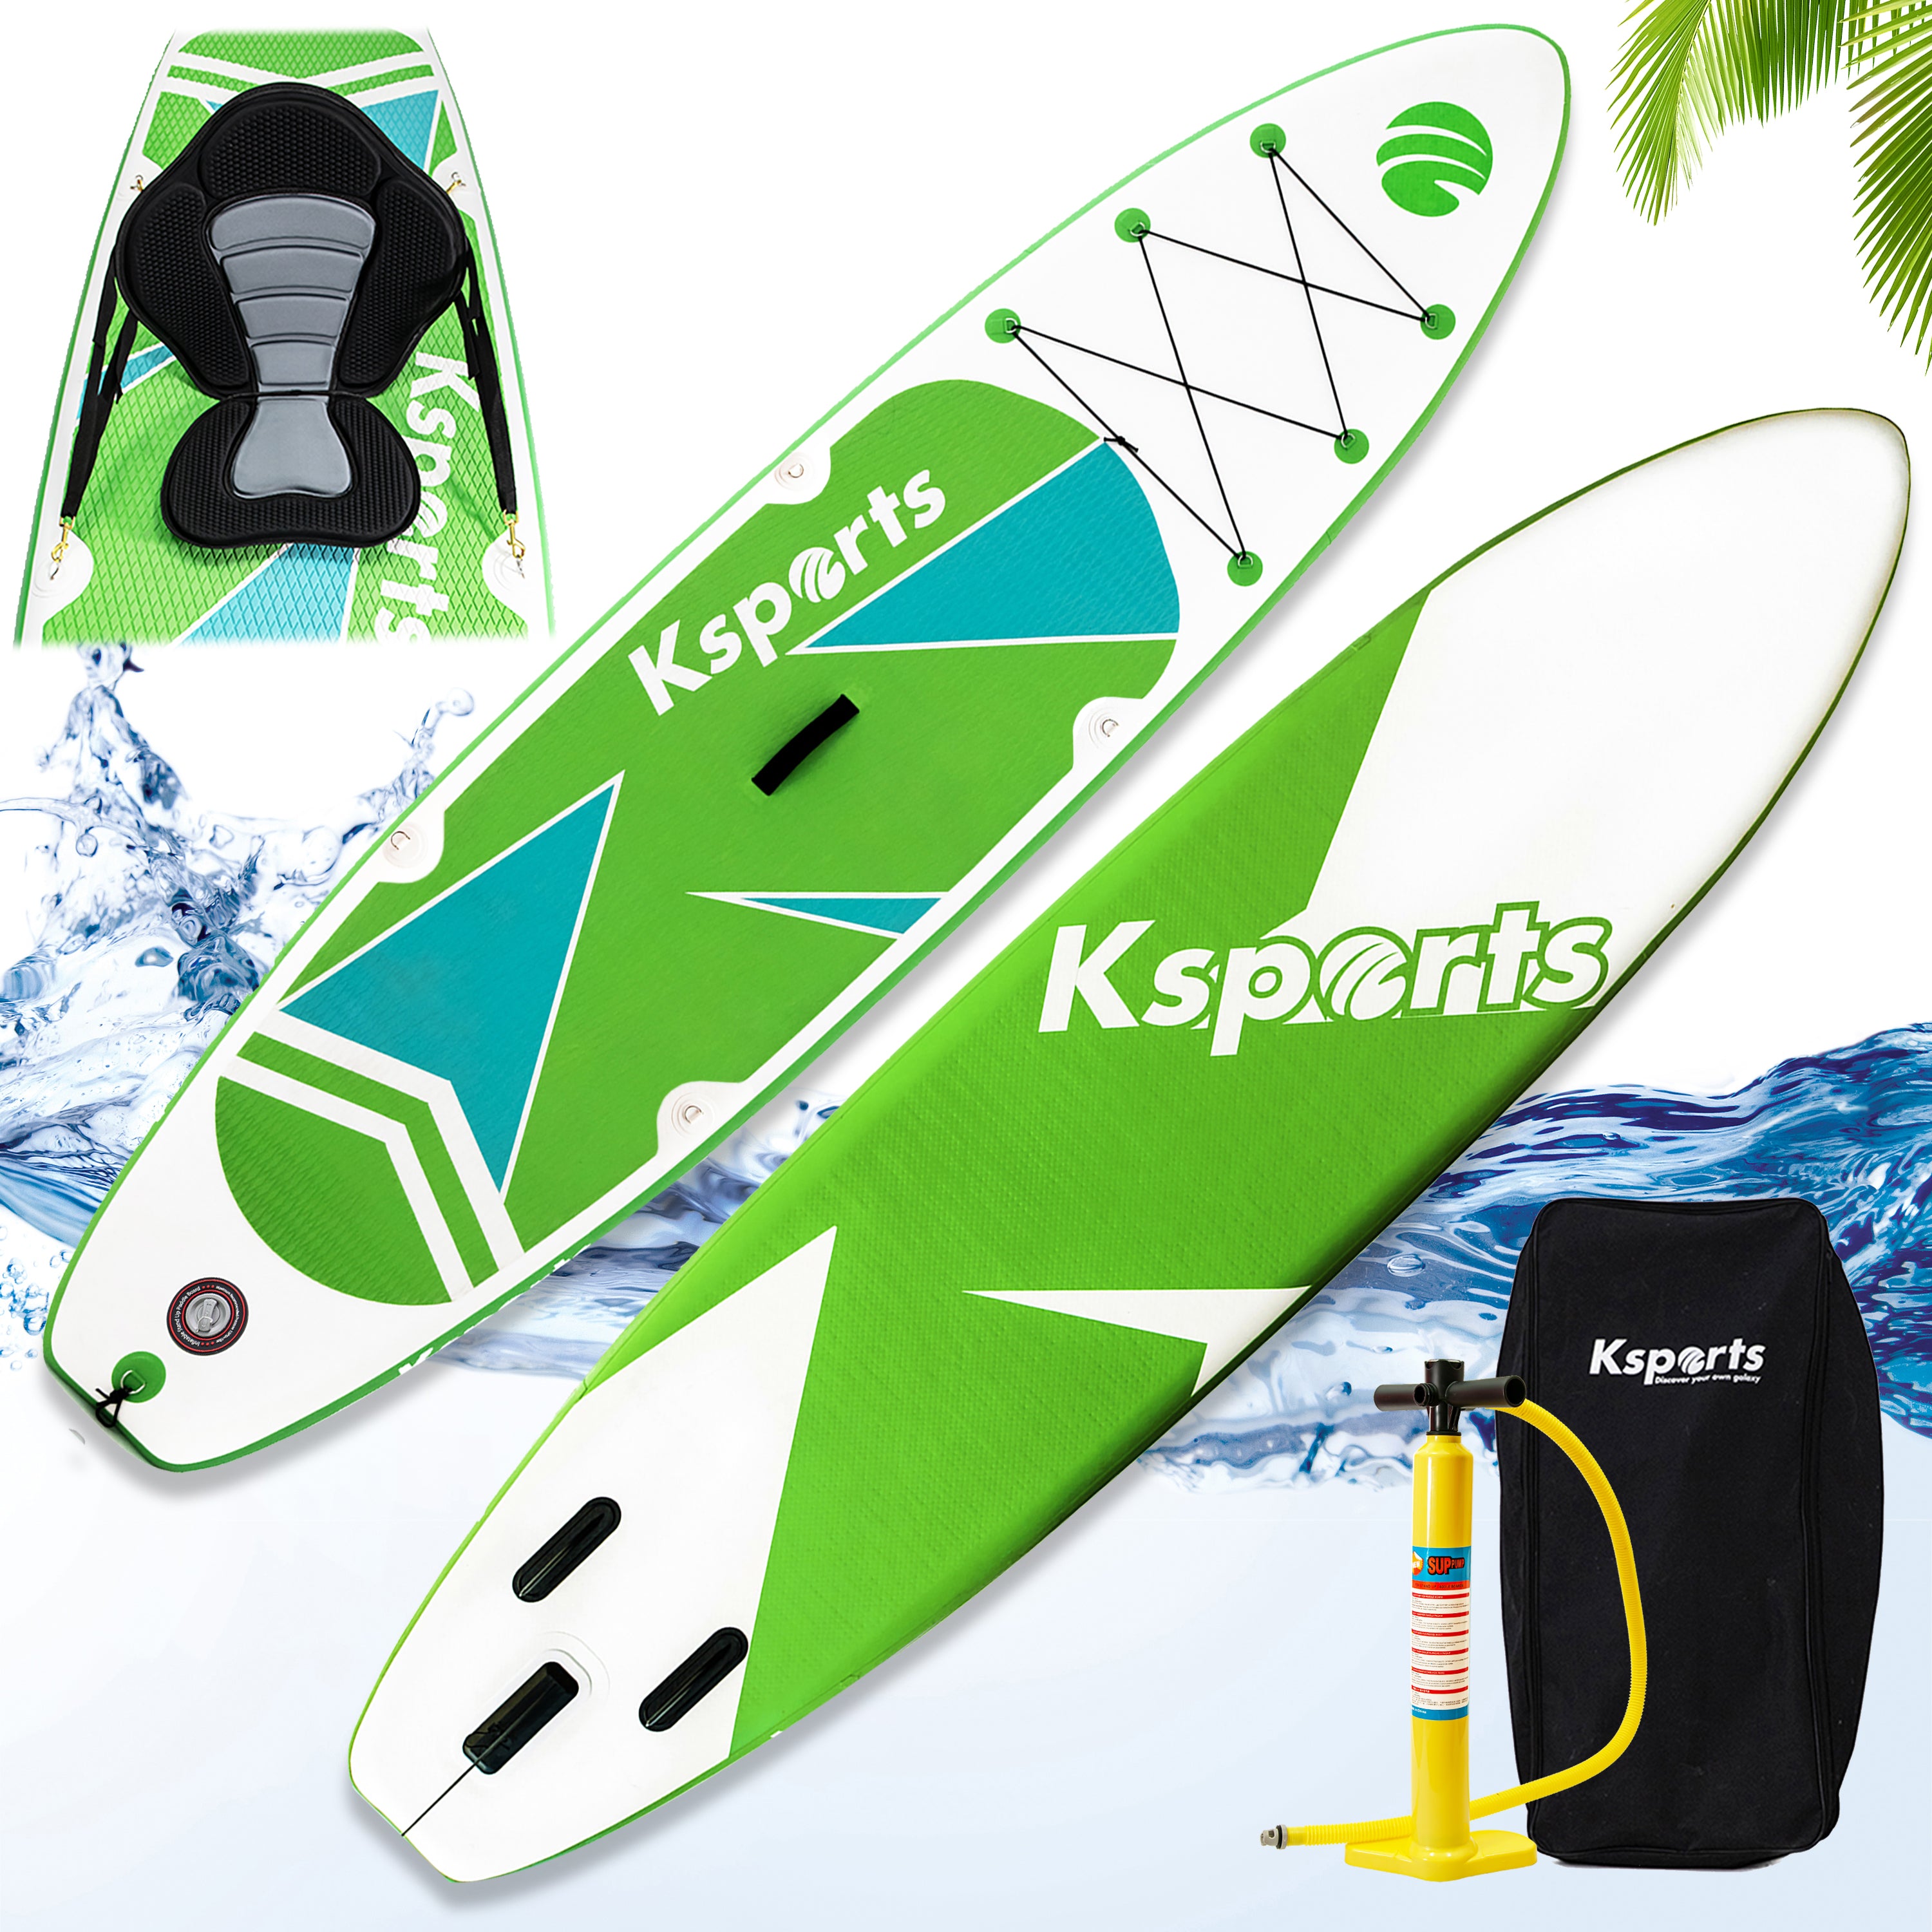 Ksports Inflatable Stand Up Paddle Board Green (10.6ftⅹ32inⅹ6in)